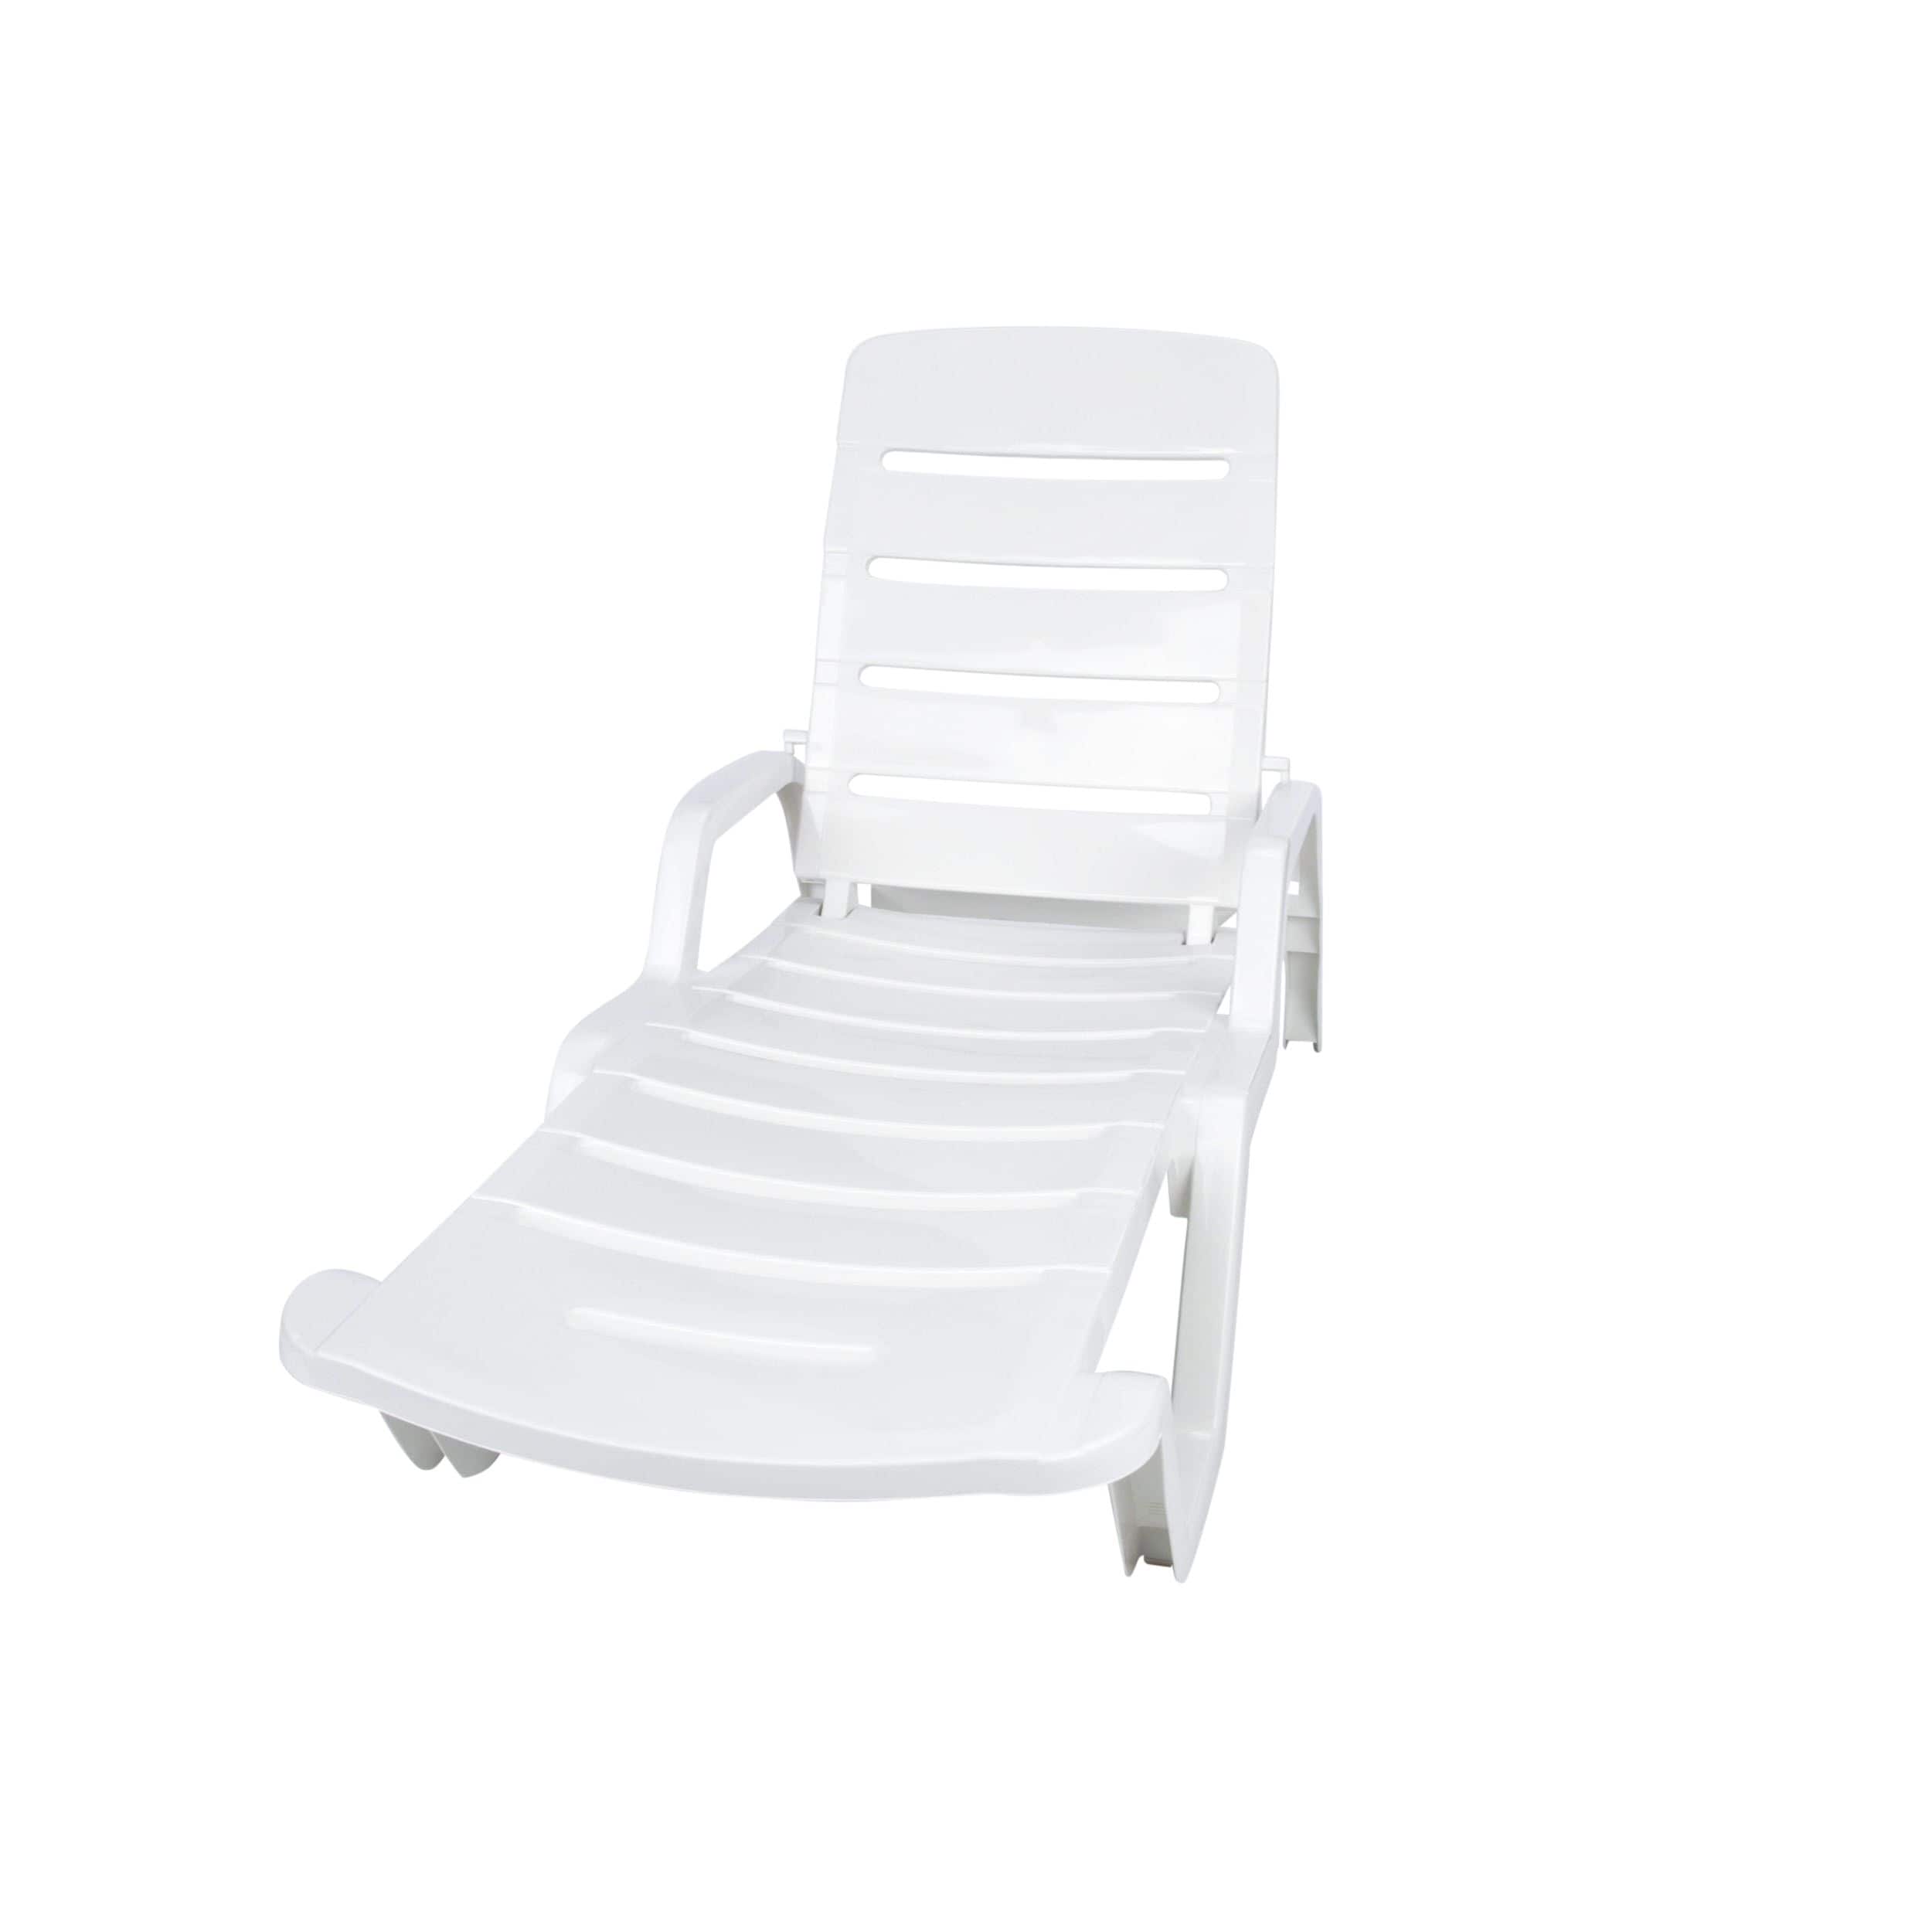 Chaise Lounge Patio Chairs At Lowes.Com